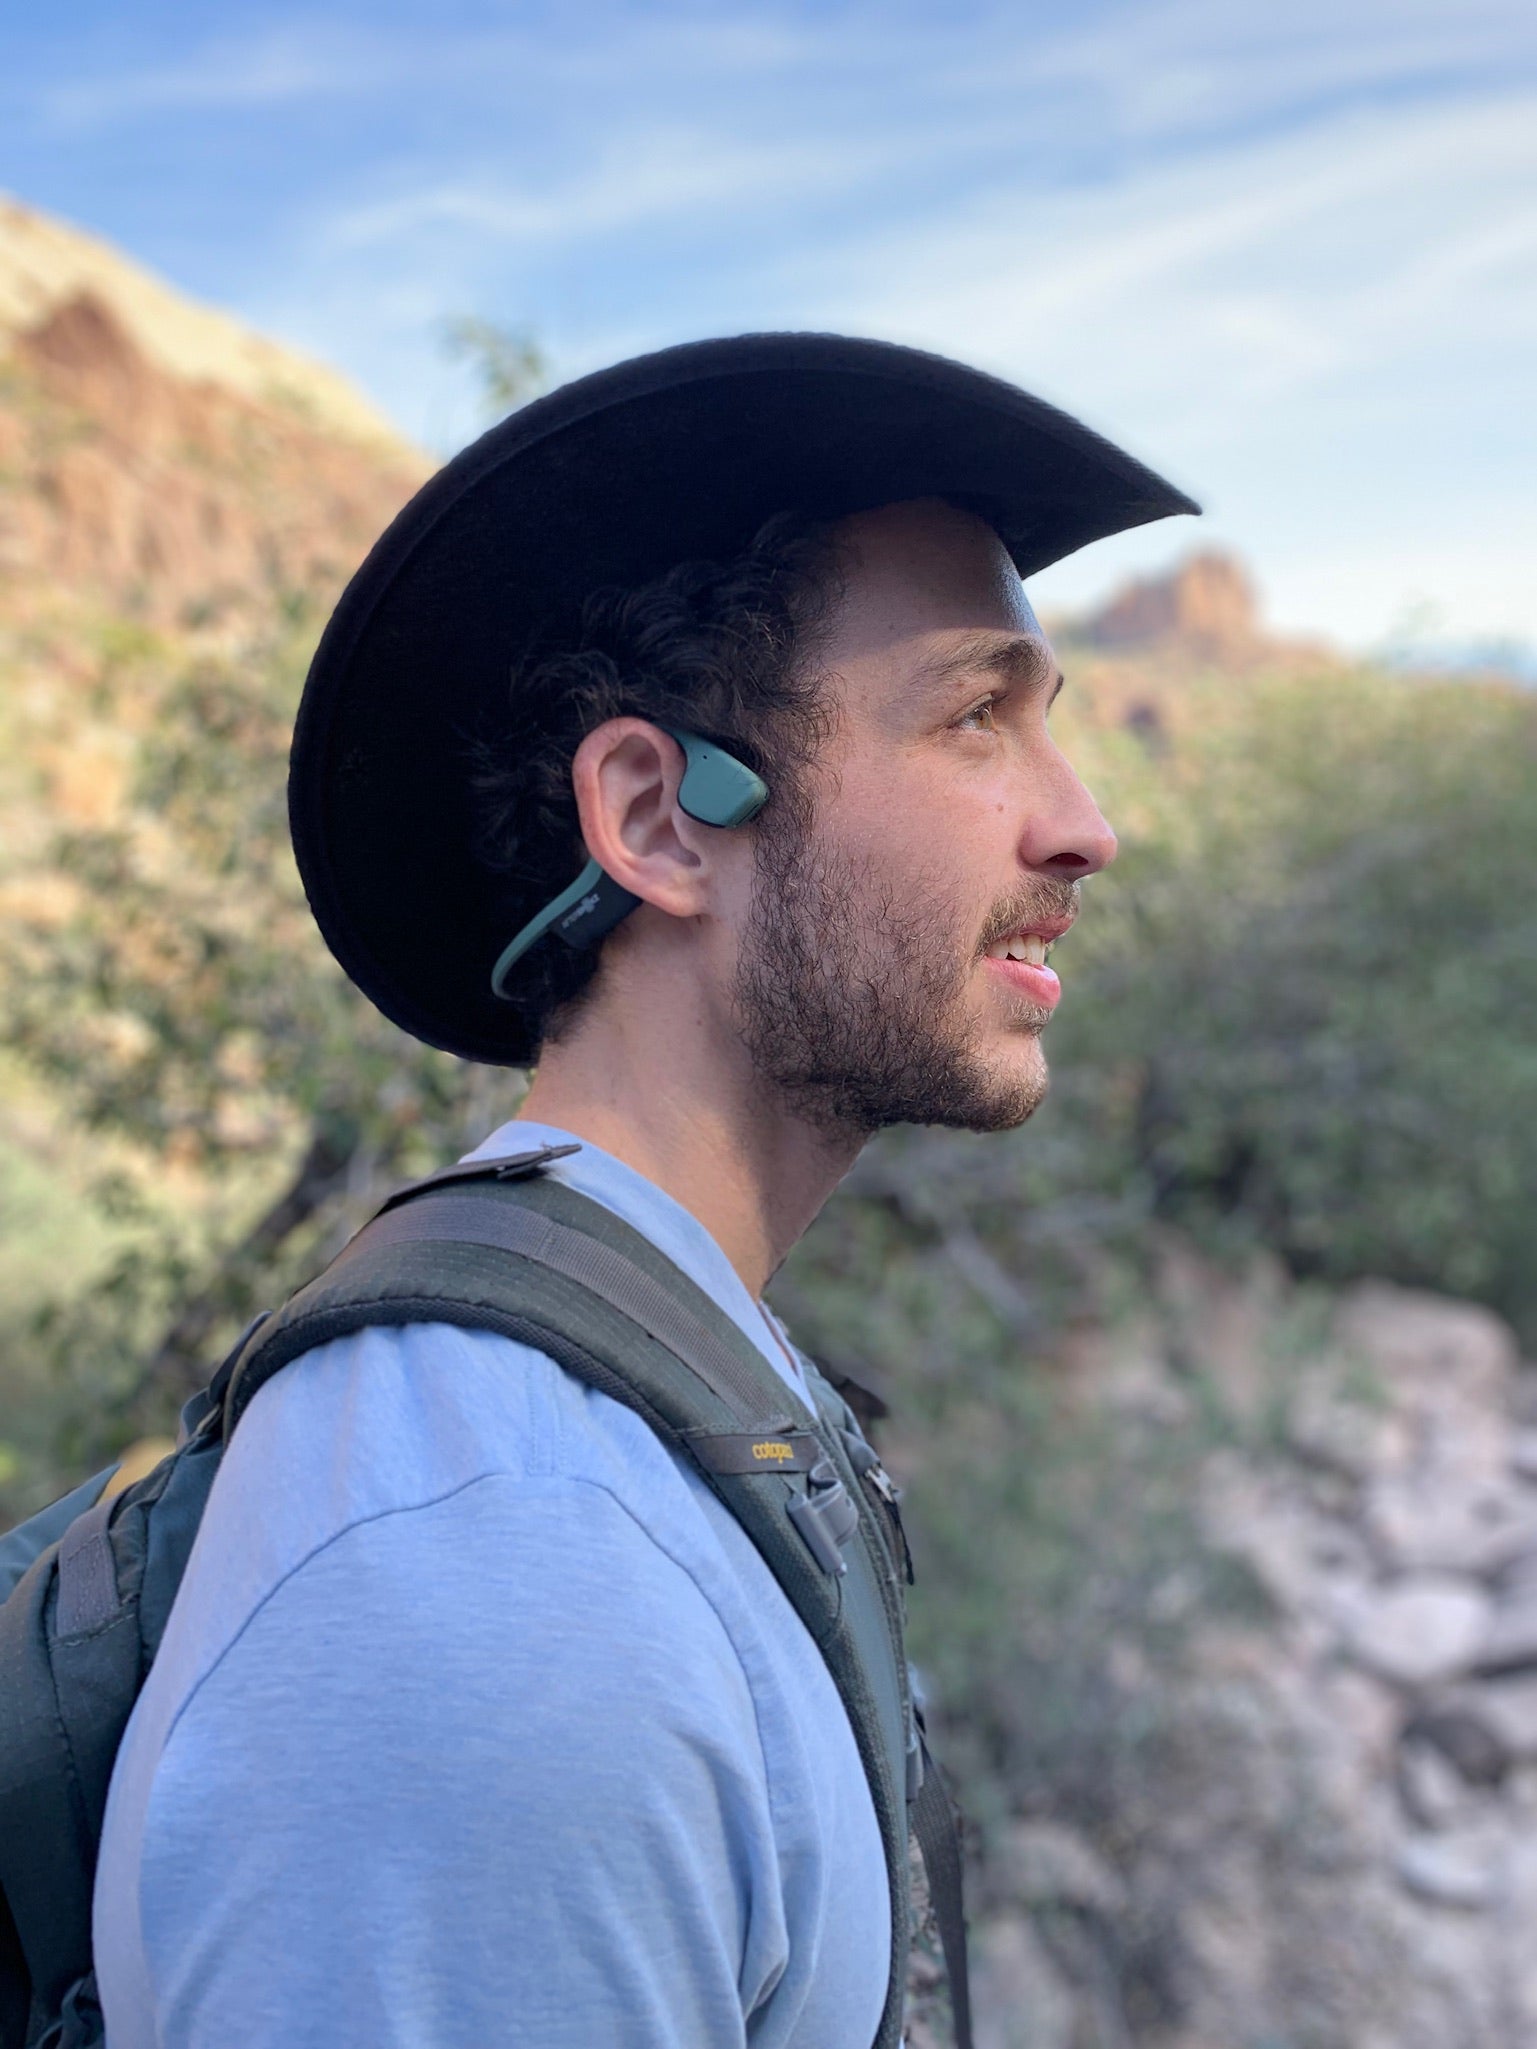 Here I am hiking up to the peak with the headphones on. As you can see my ears are open and ready to take in all the sounds of natura round me.